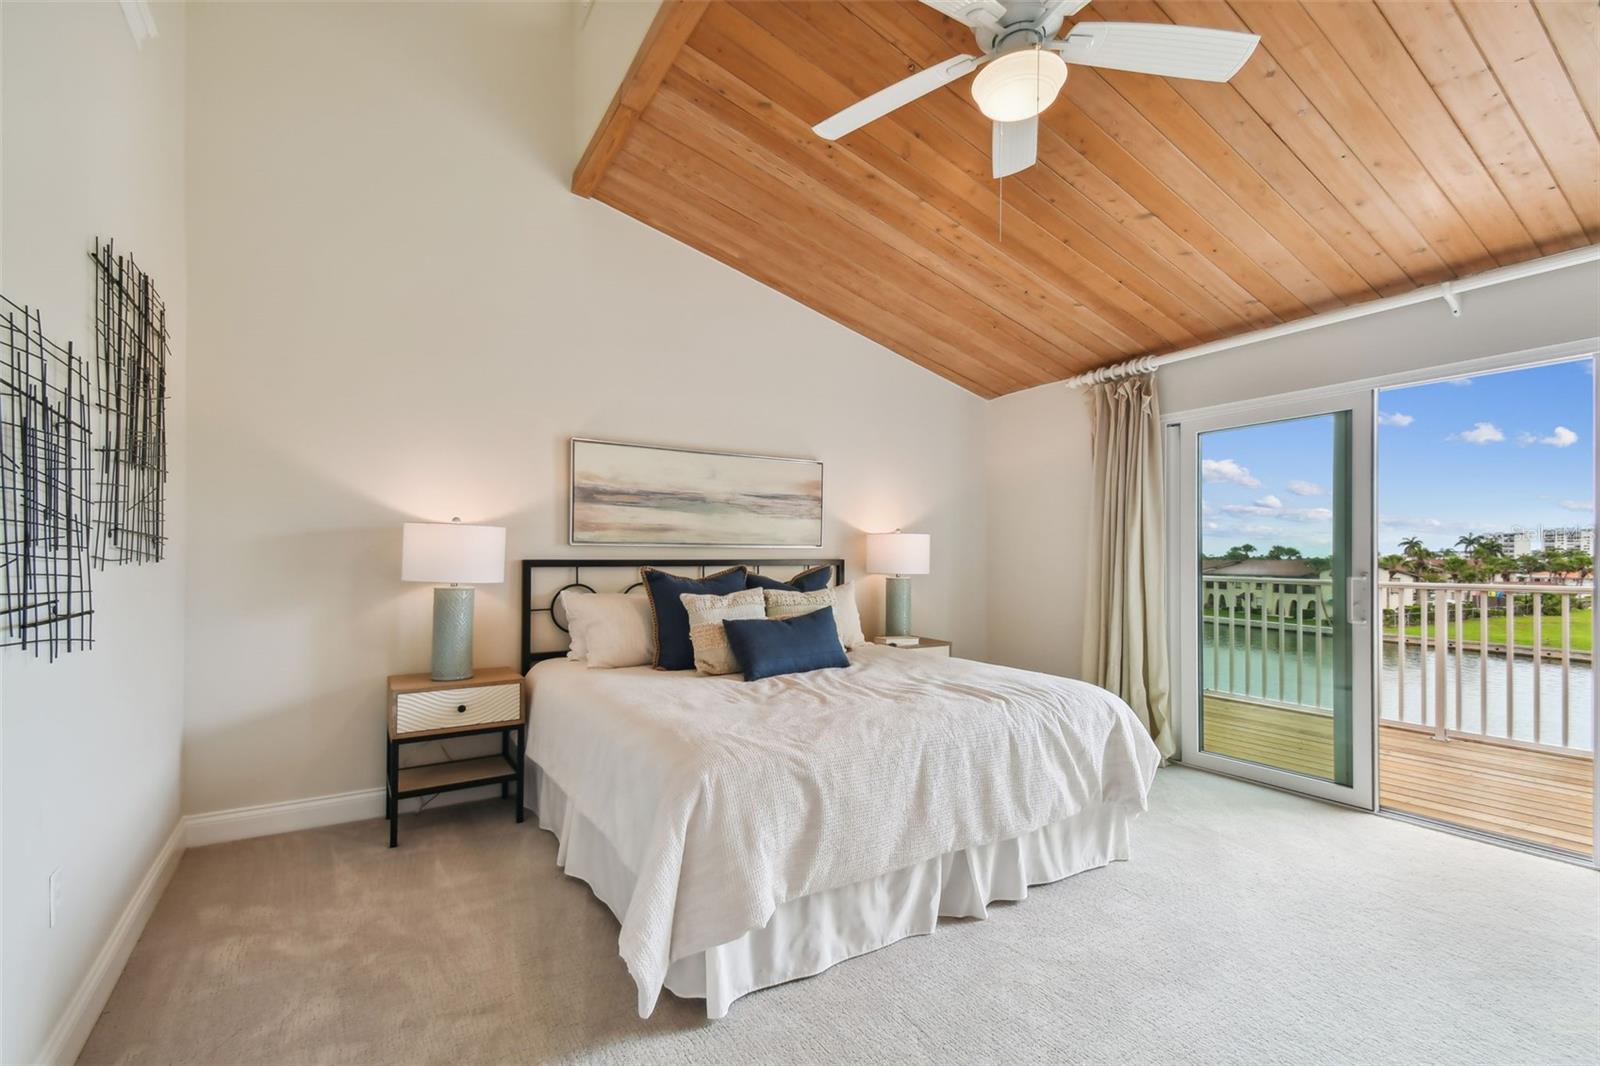 Primary suit with vaulted ceilings, waterfront balcony, remodeled bath and huge walk-in closet